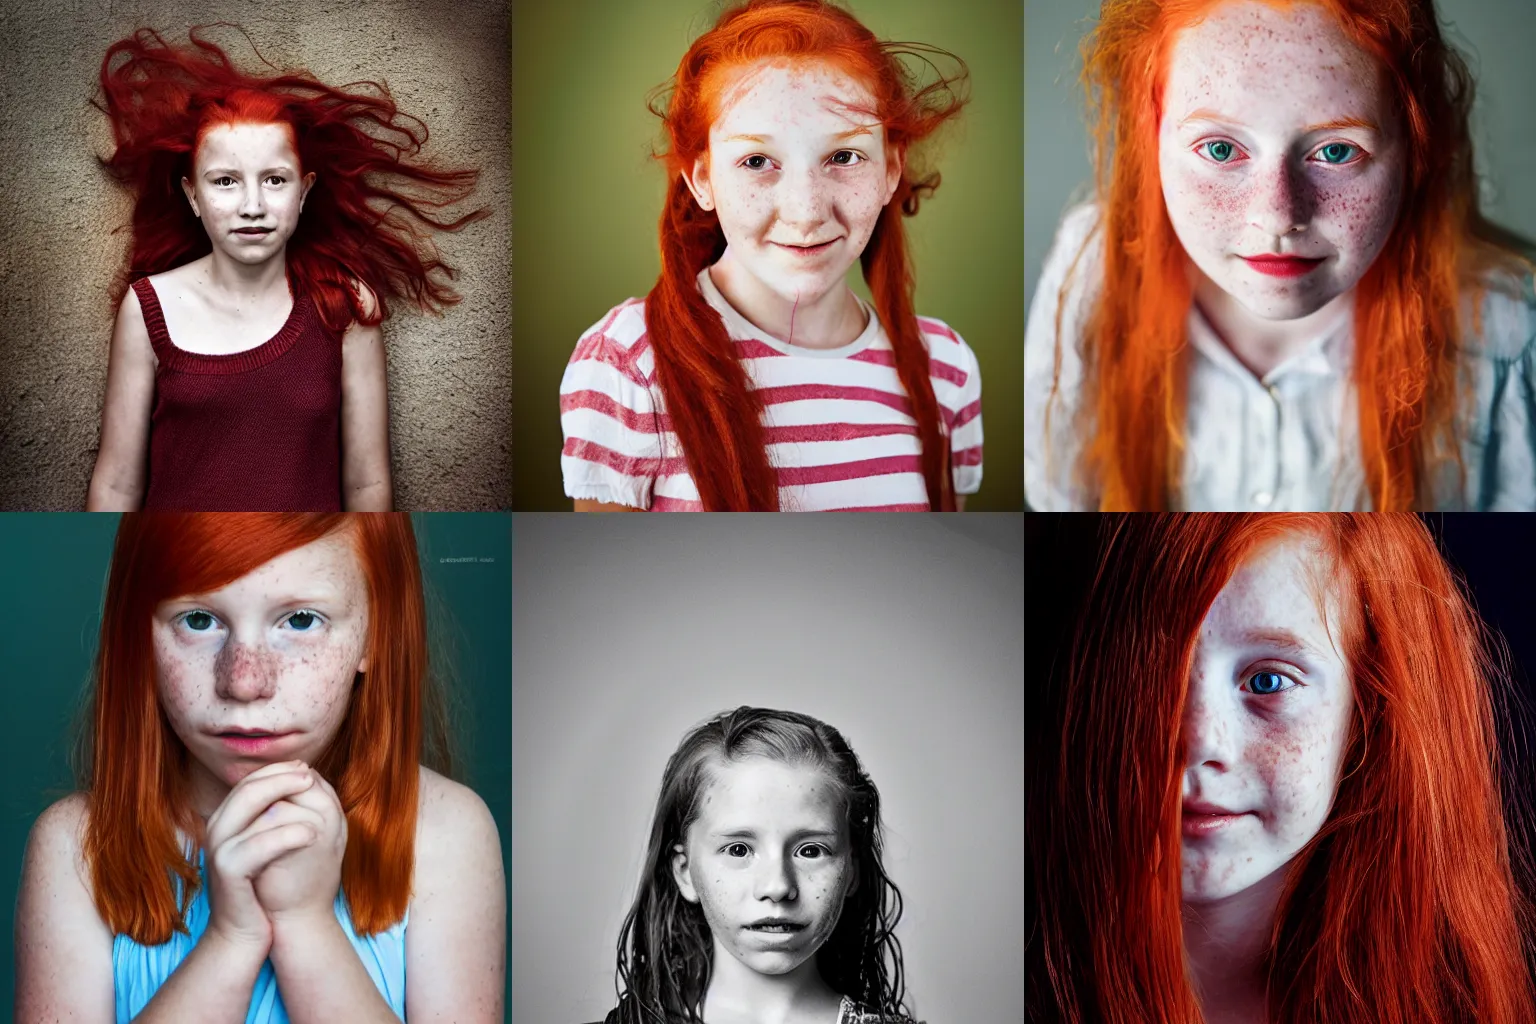 Prompt: Photograph of a 10 year old girl in the style of Annie Leibovitz, red hair, freckles